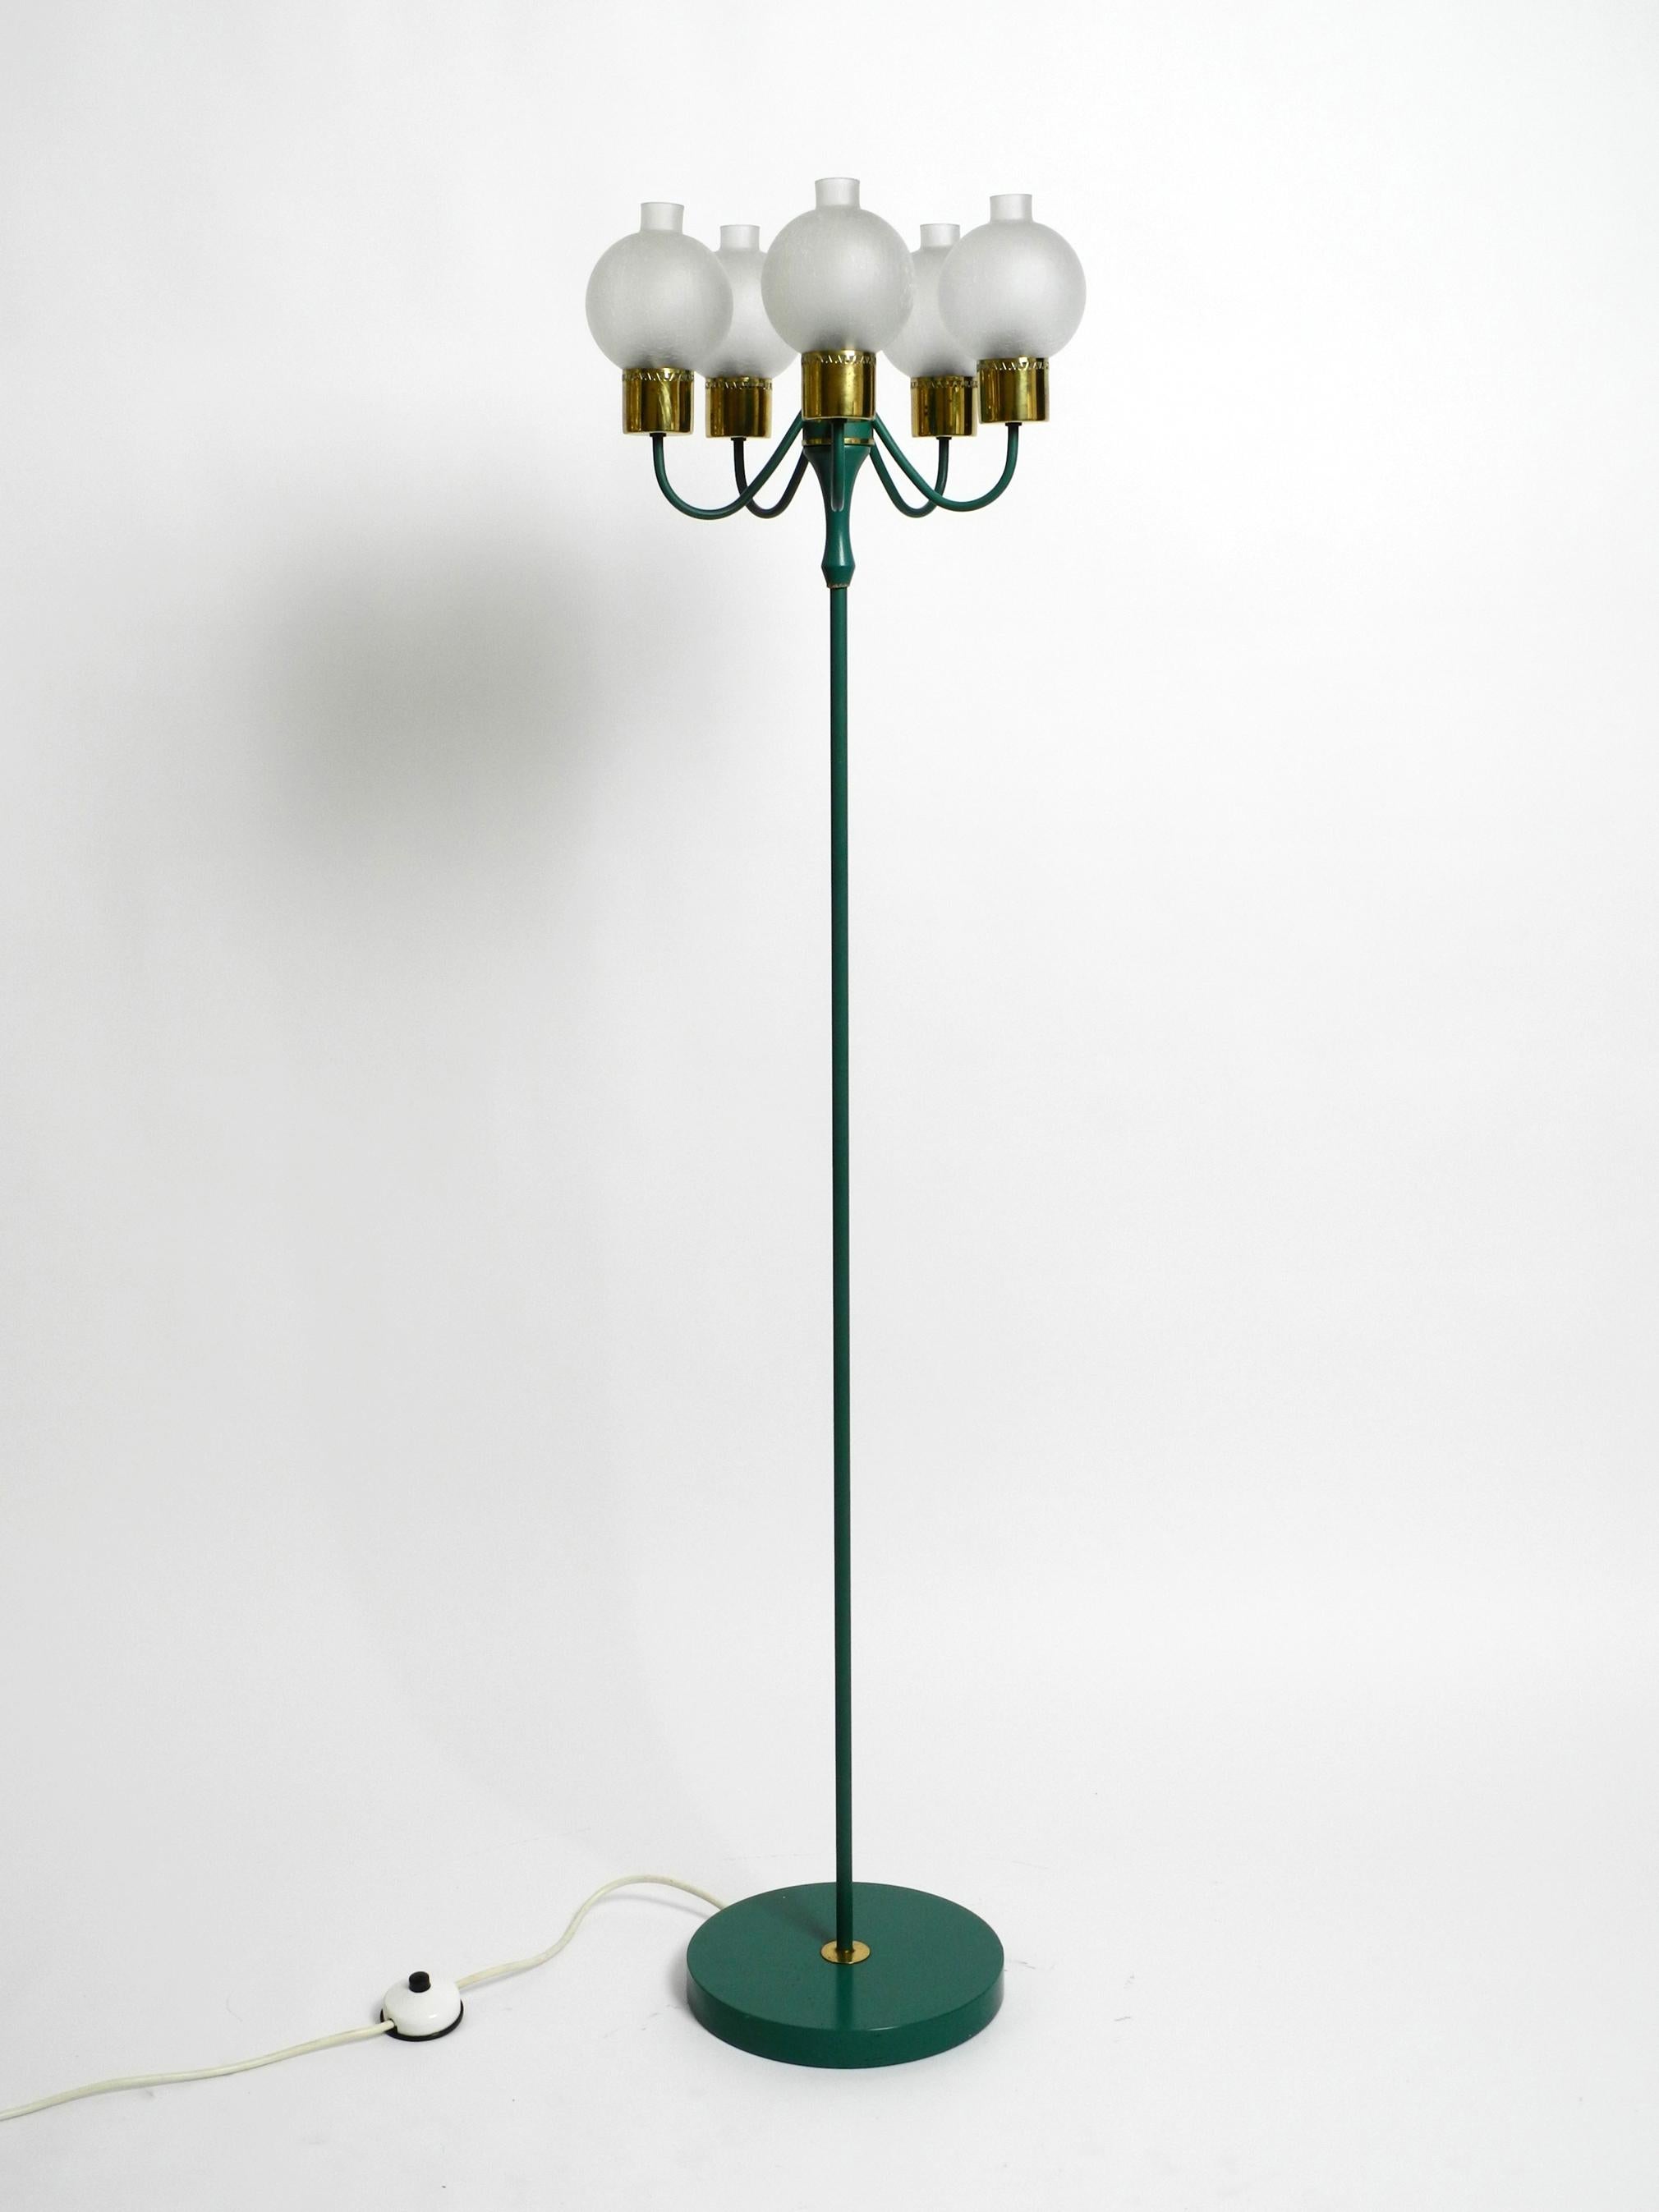 Original 1960s Kaiser Metal Floor Lamp with 5 Ice Glass Shades in Forest Green 14